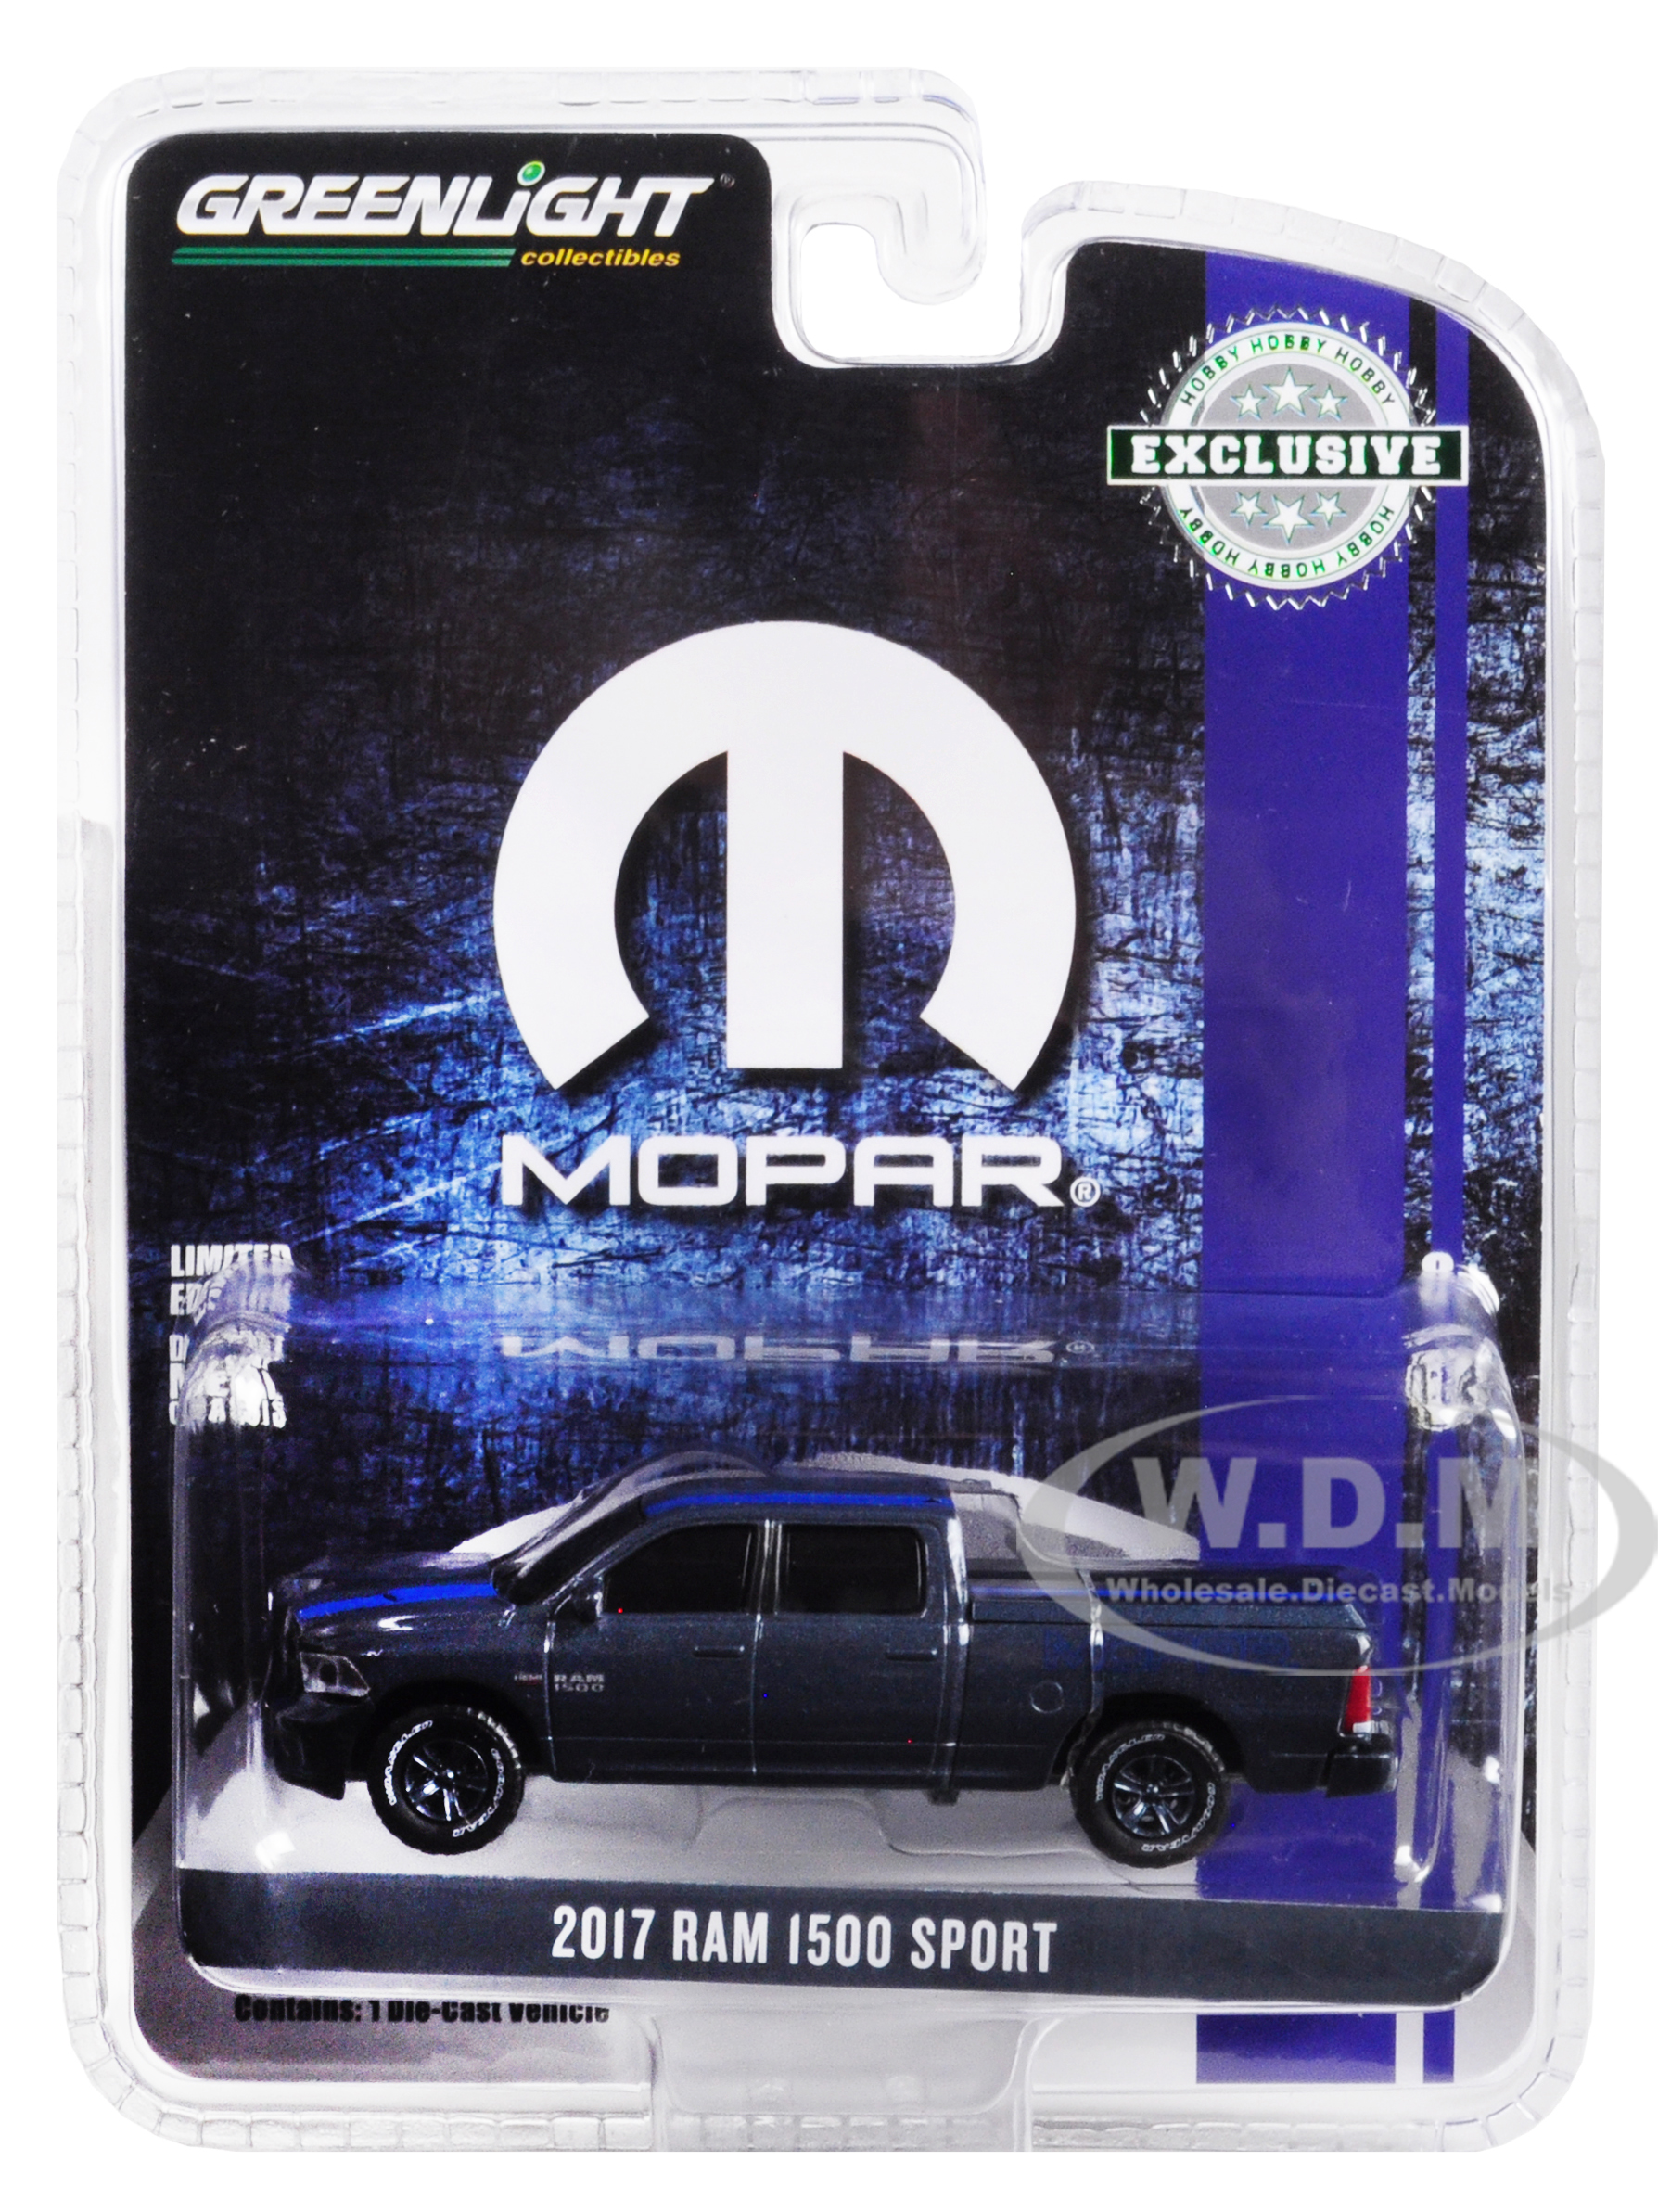 2017 Dodge Ram 1500 Sport Pickup Truck With Bed Cover Metallic Dark Blue And Blue Stripe "mopar" "hobby Exclusive" 1/64 Diecast Model Car By Greenlig